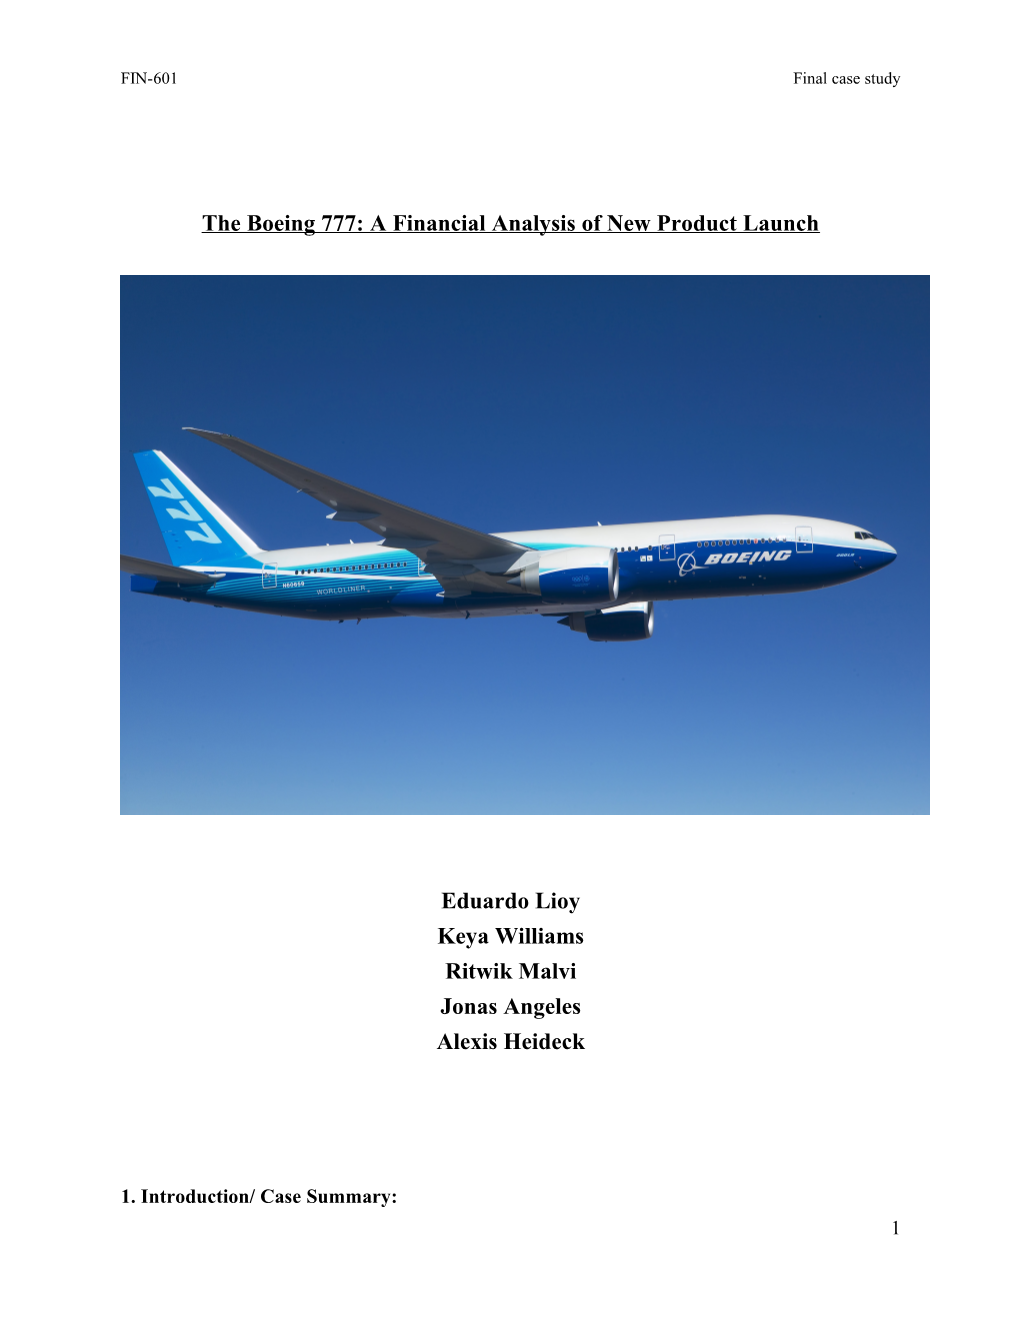 The Boeing 777: a Financial Analysis of New Product Launch